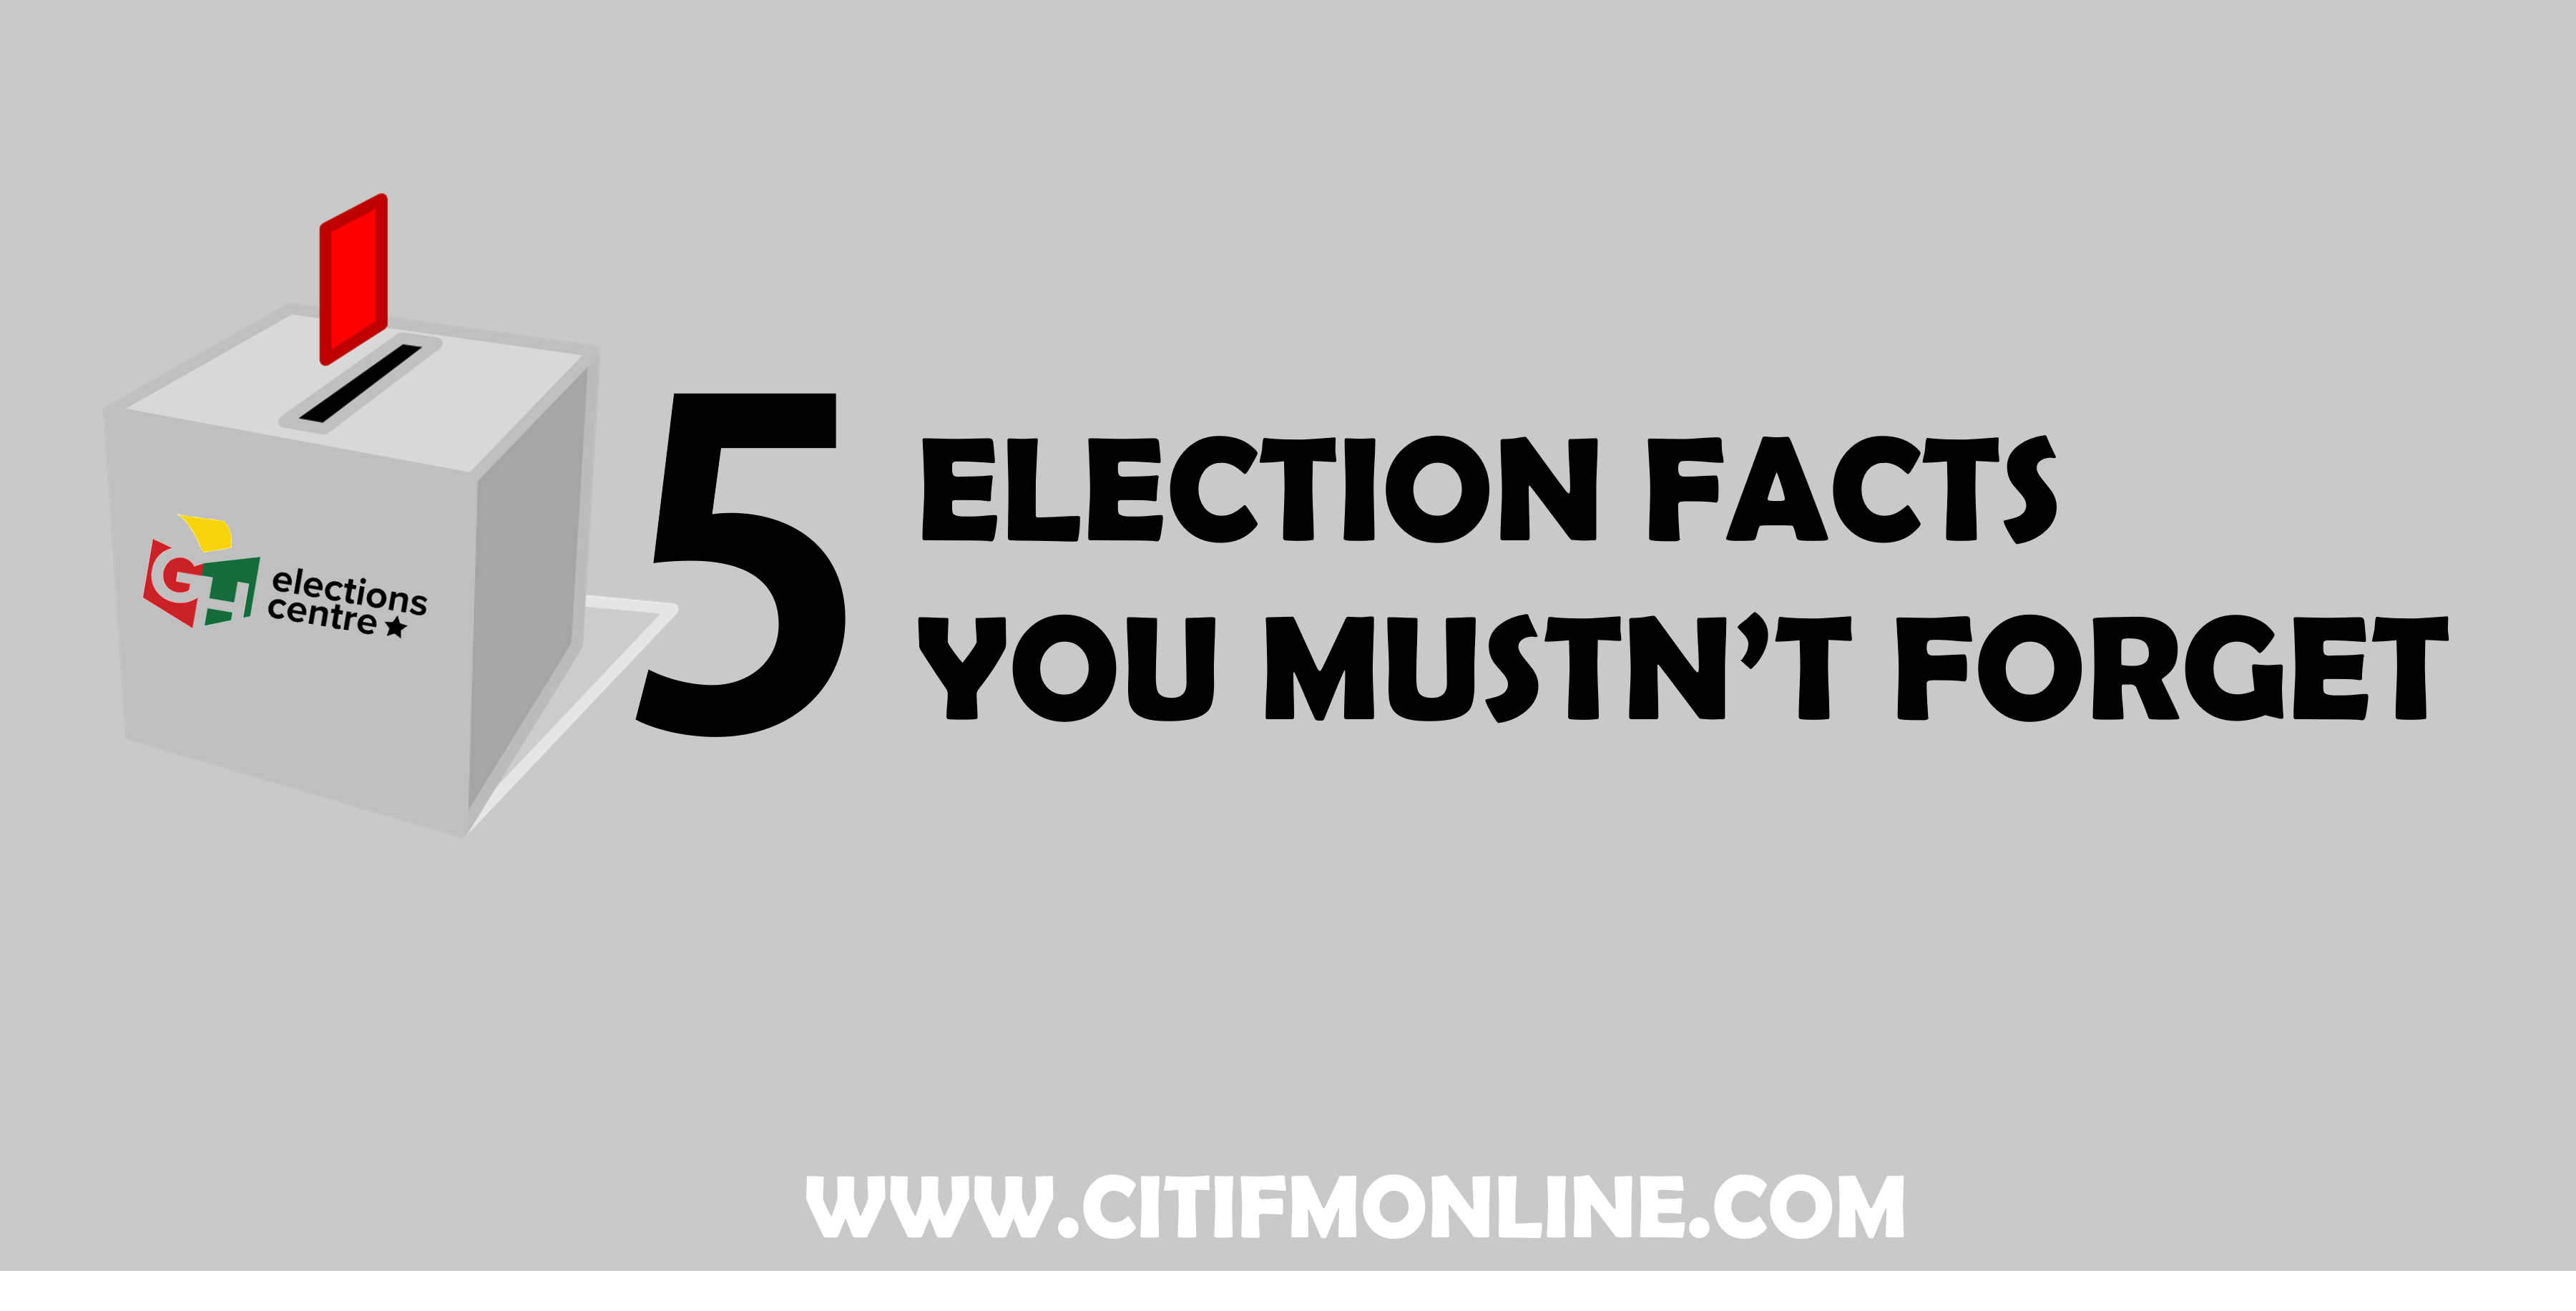 5 election facts to remember [Infographic]